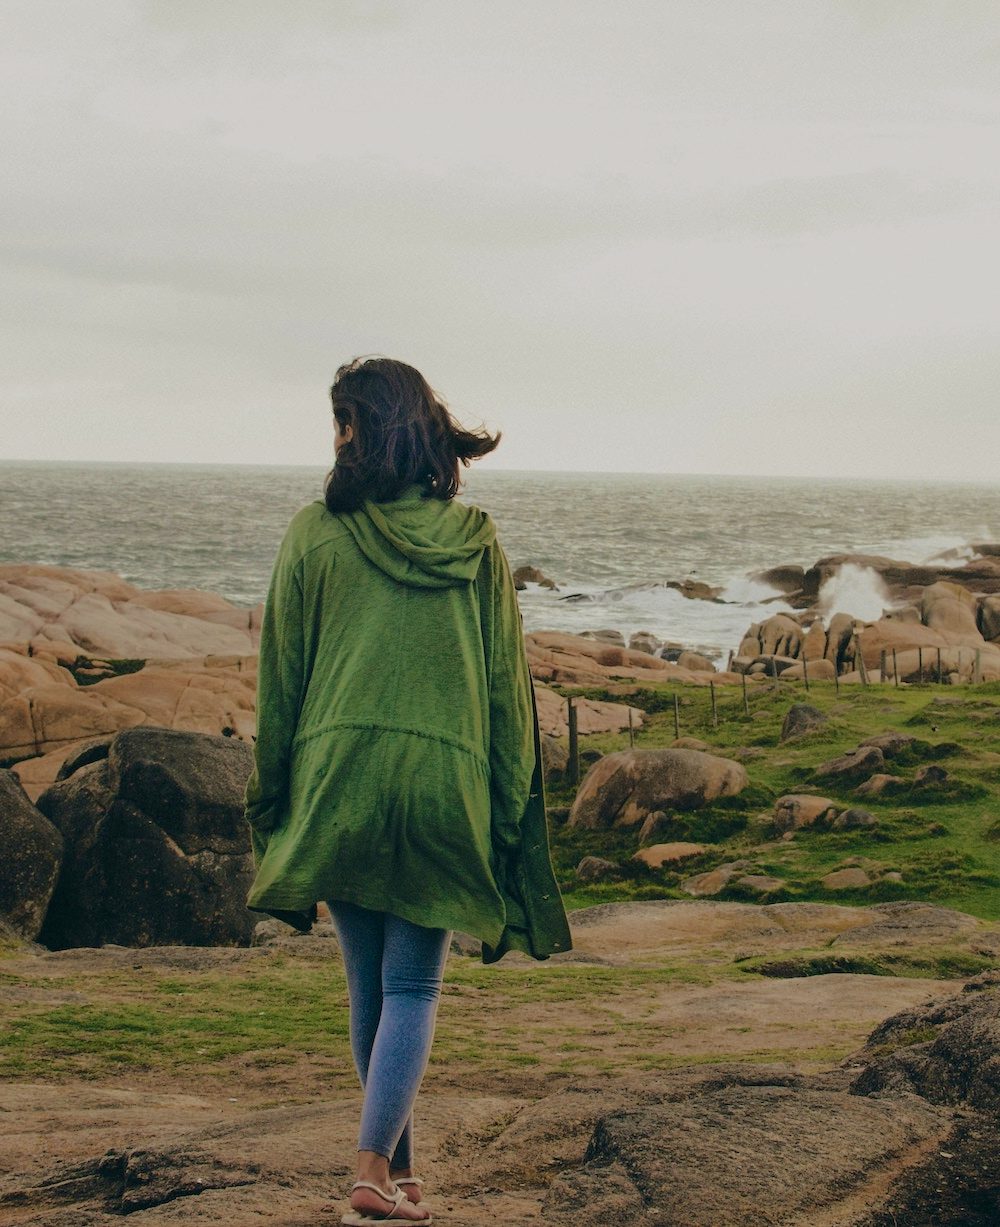 A woman takes a walk on a rocky beach in a green jacket.